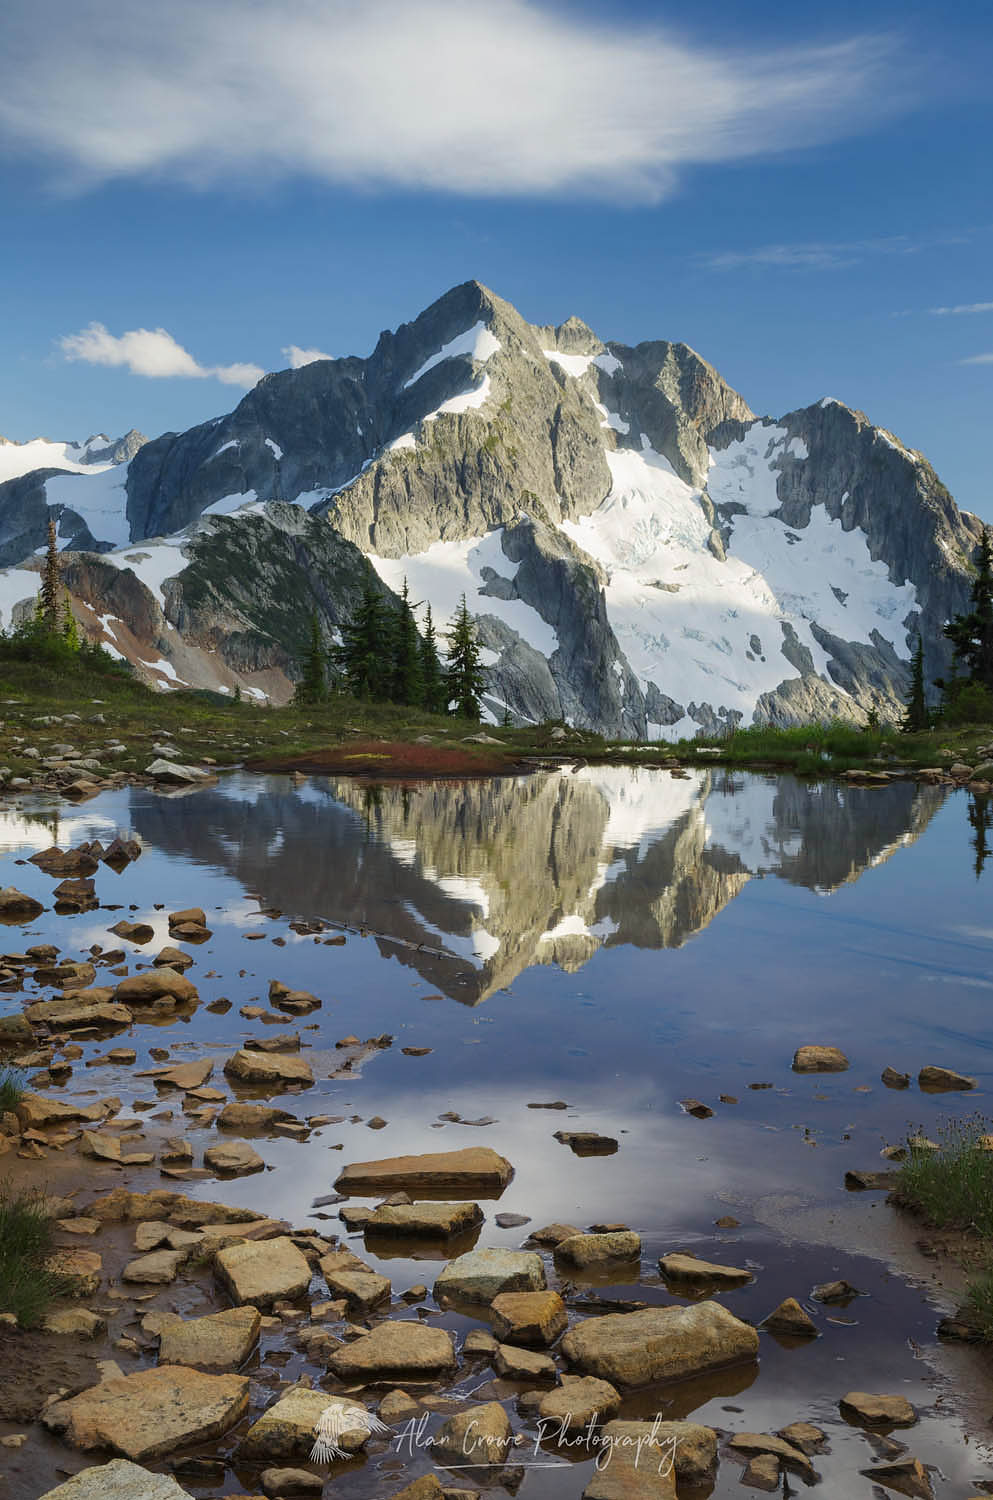 Whatcom Peak reflected in Tapto Lake, North Cascades National Park #61461